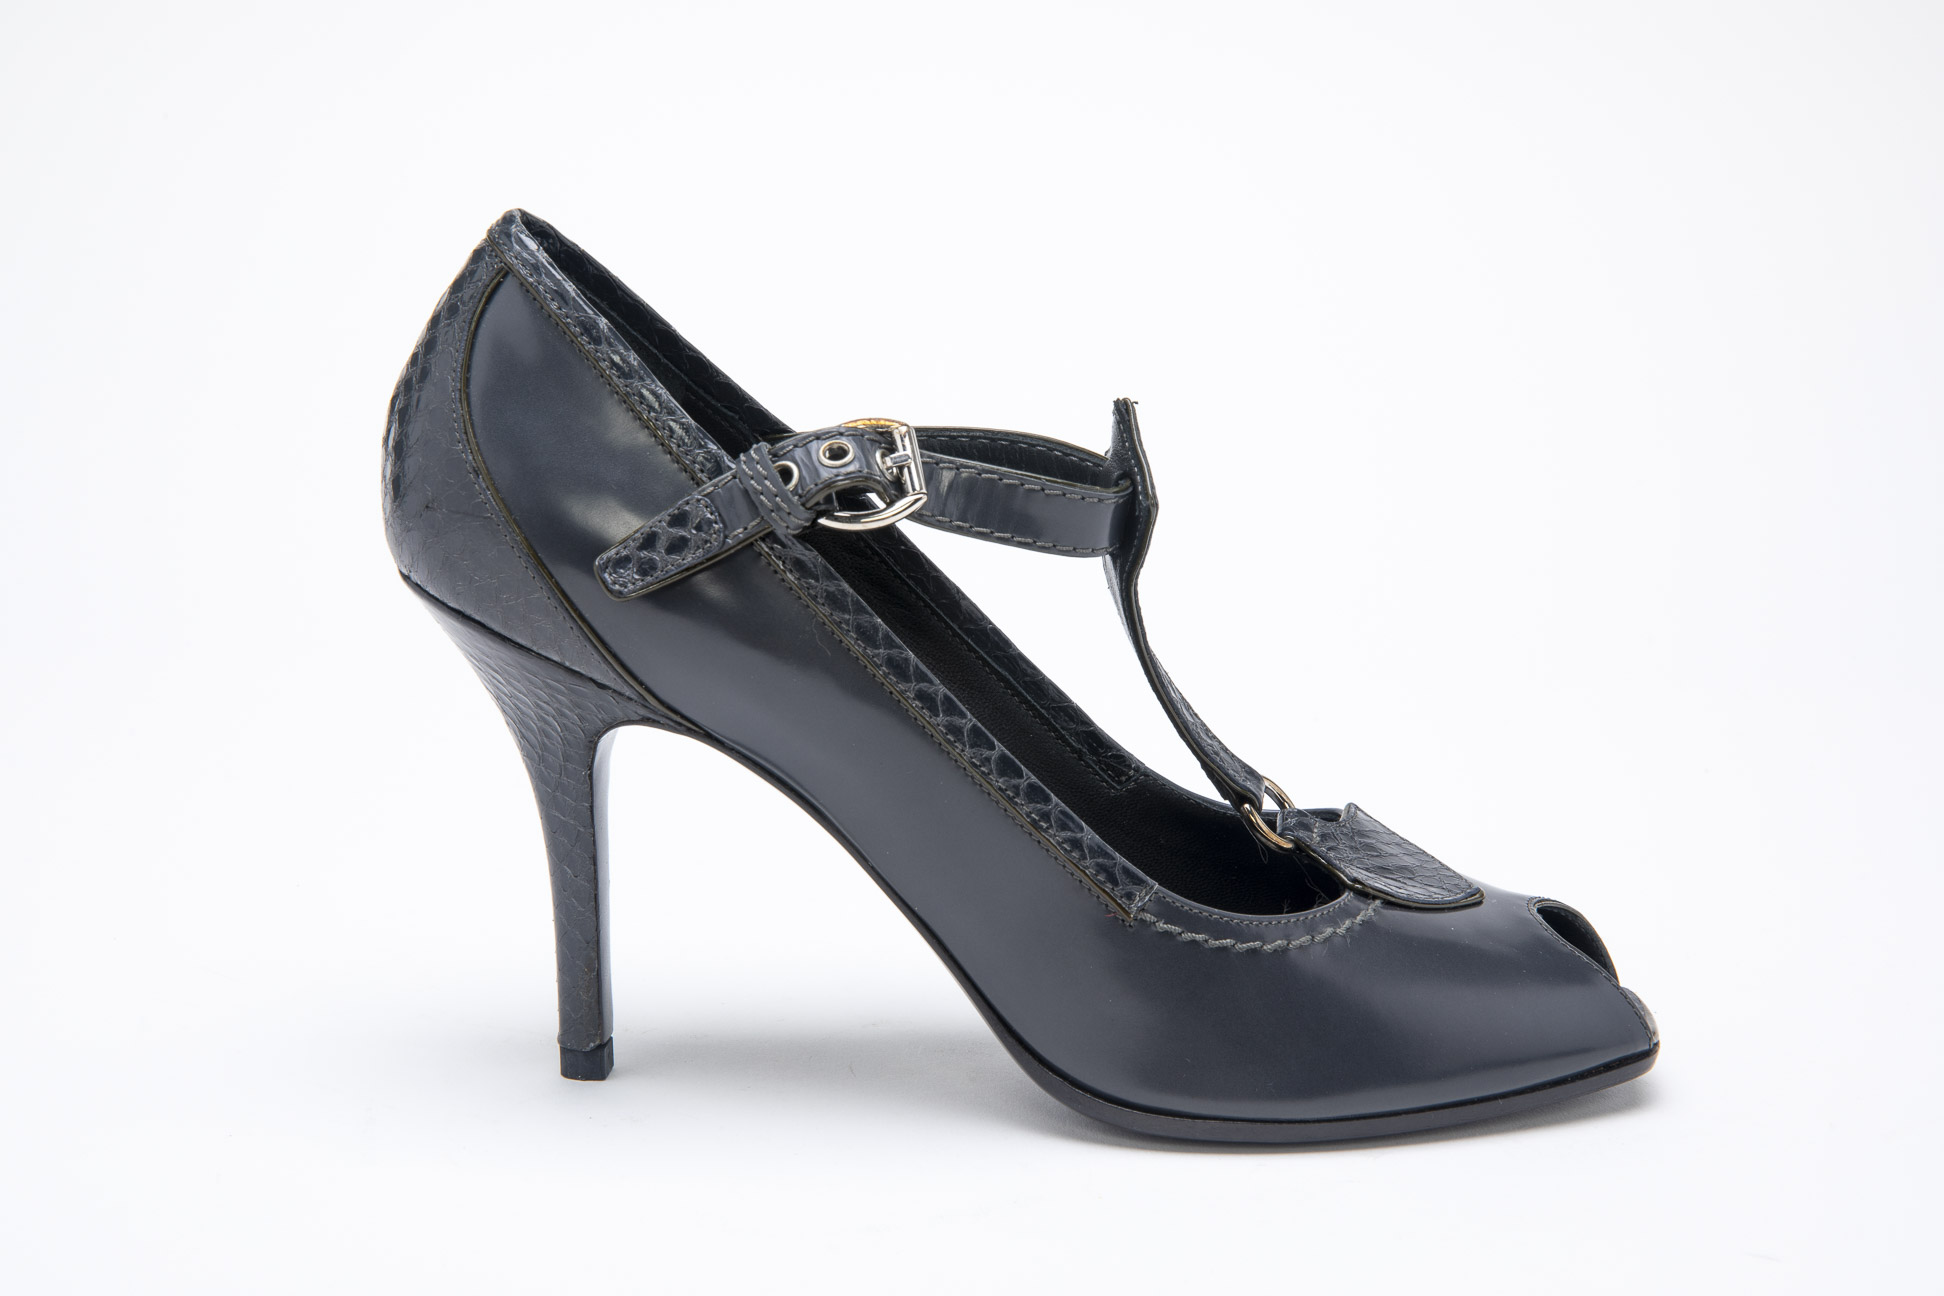 A PAIR OF LOUIS VUITTON CHARCOAL LEATHER HEELS EU 38.5 - Image 2 of 4